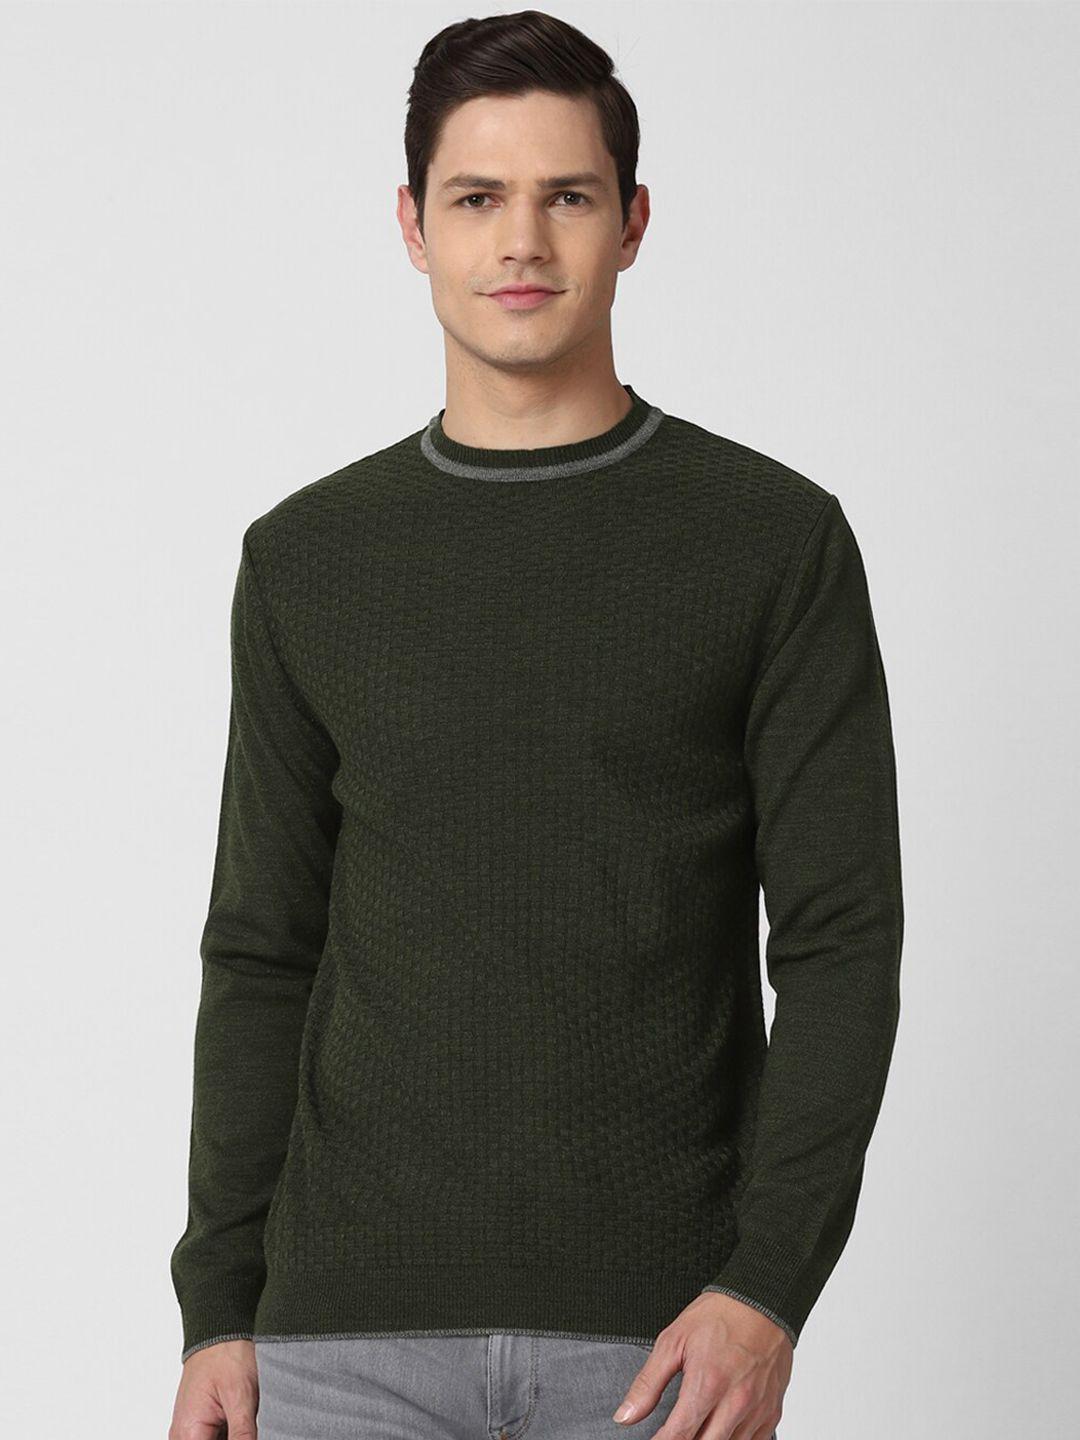 peter england casuals men olive green pullover sweater